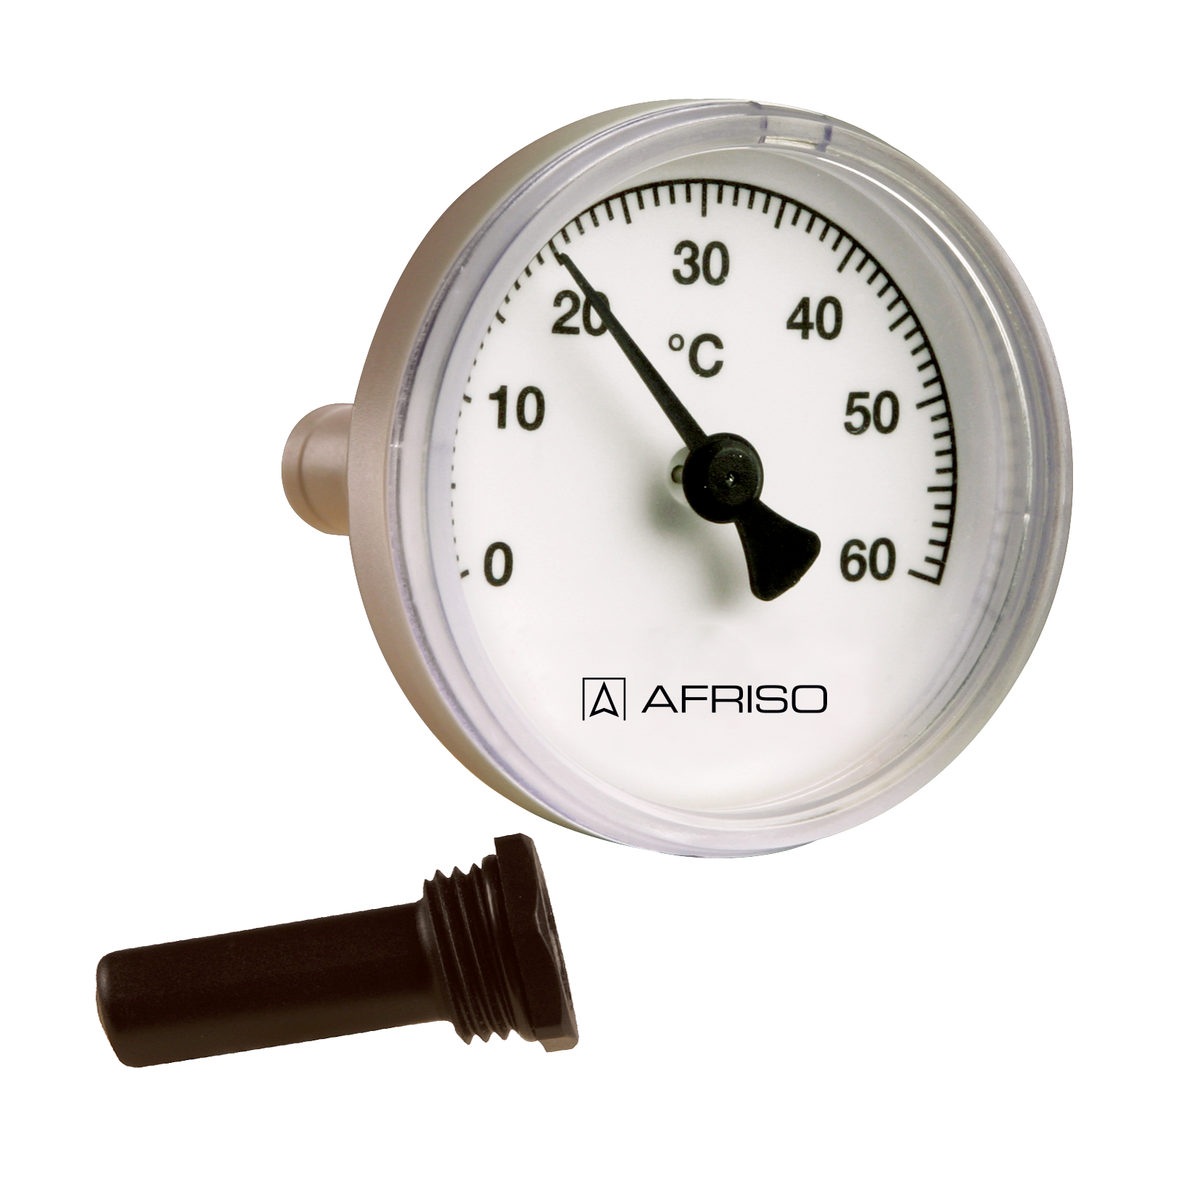 AFRISO Bimetall-Thermometer BiTh 50 K 0/60C 40mm 1/2 axial Kl.2 SAL 87690 object_image_57154imagemain_en